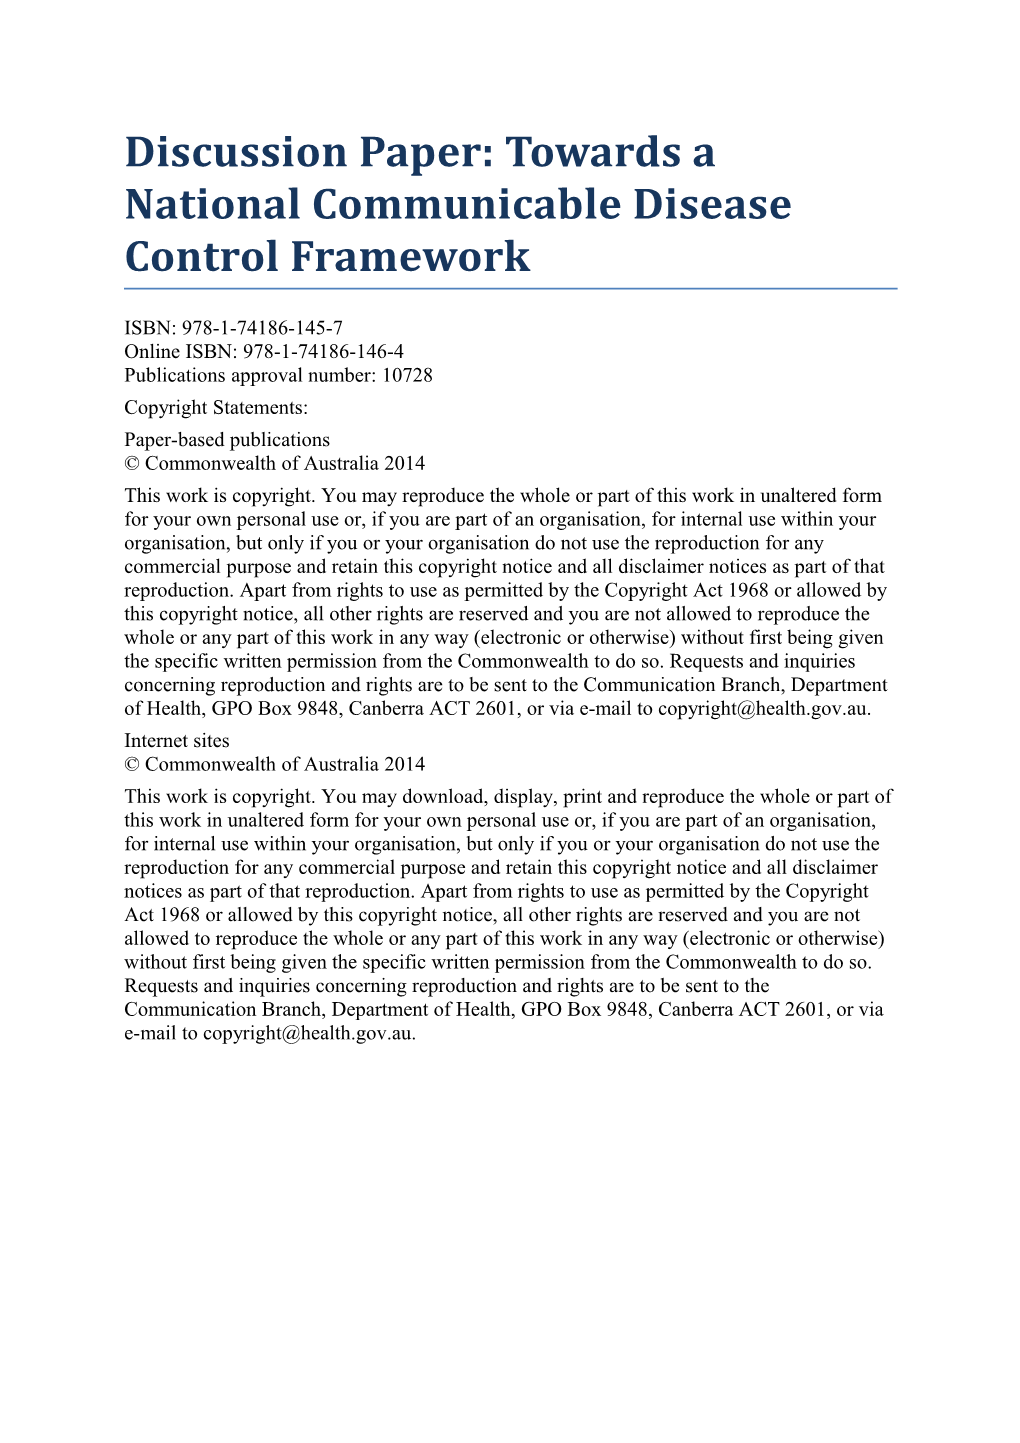 Discussion Paper: Towards a National Communicable Disease Control Framework